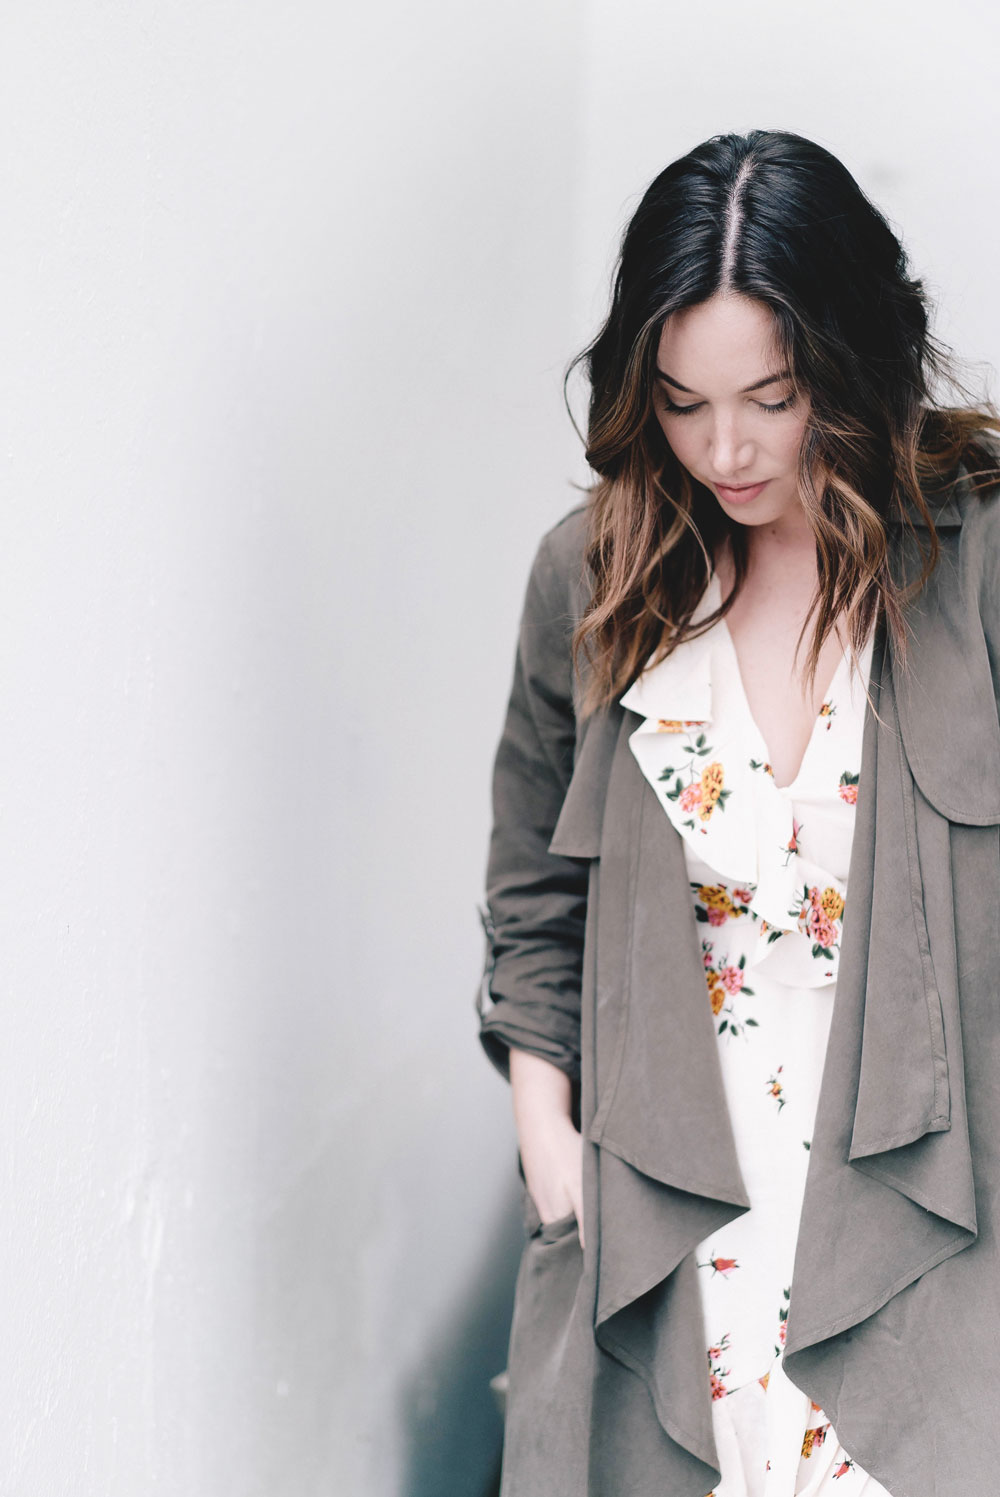 how to wear florals in revolve dress, lovers and friends dress, cluse watch, aritzia bega bag, how to style spring trench coat, how to stack jewelry, floral dress ideas by To Vogue or Bust